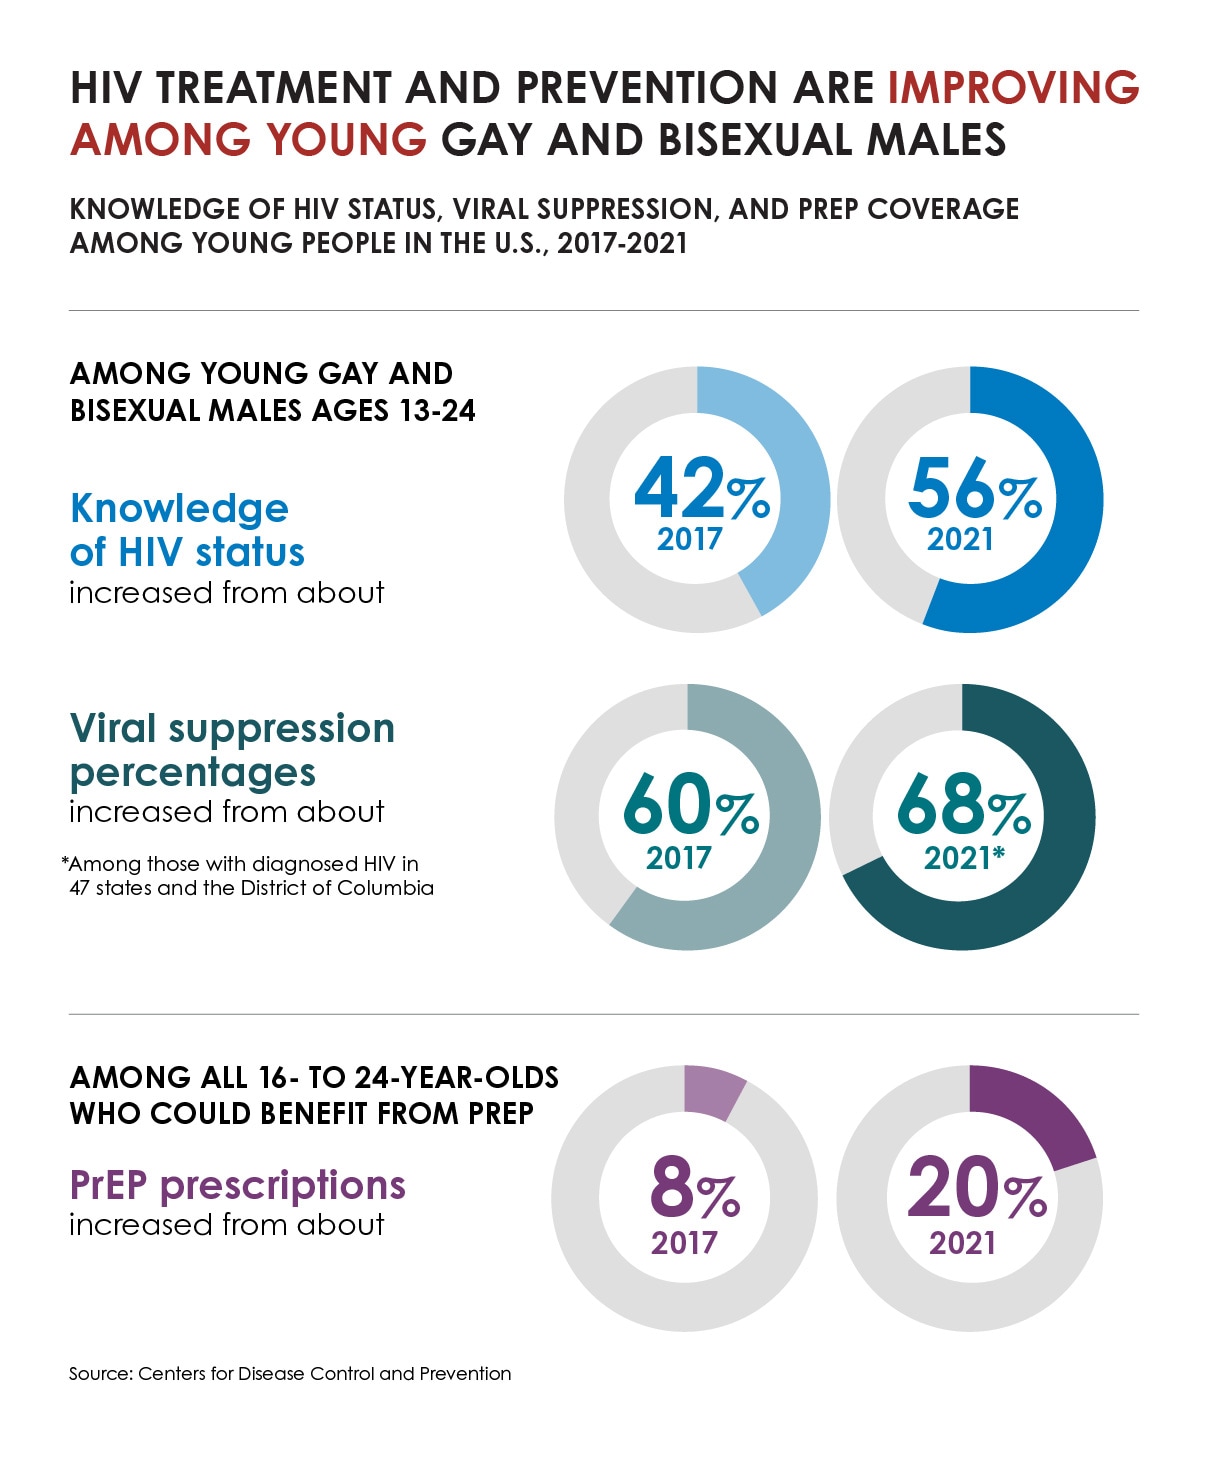 A graphic showing that knowledge of HIV status, HIV viral suppression percentages, and PrEP prescriptions increased among young people in the U.S. between 2017-2021.